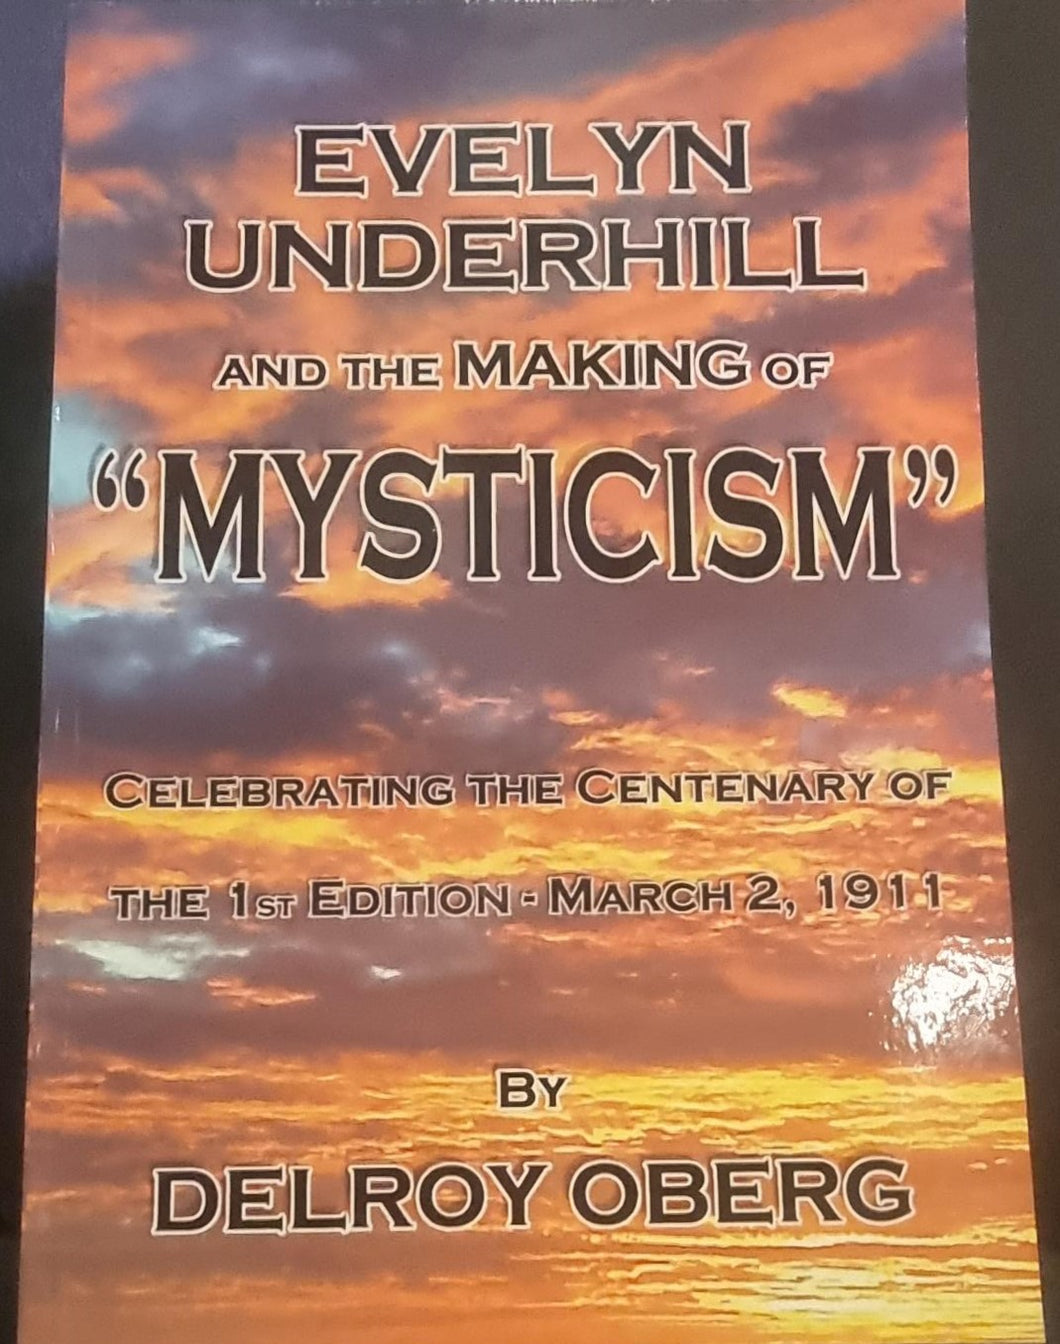 Evelyn Underhill And The Making of Mysticism